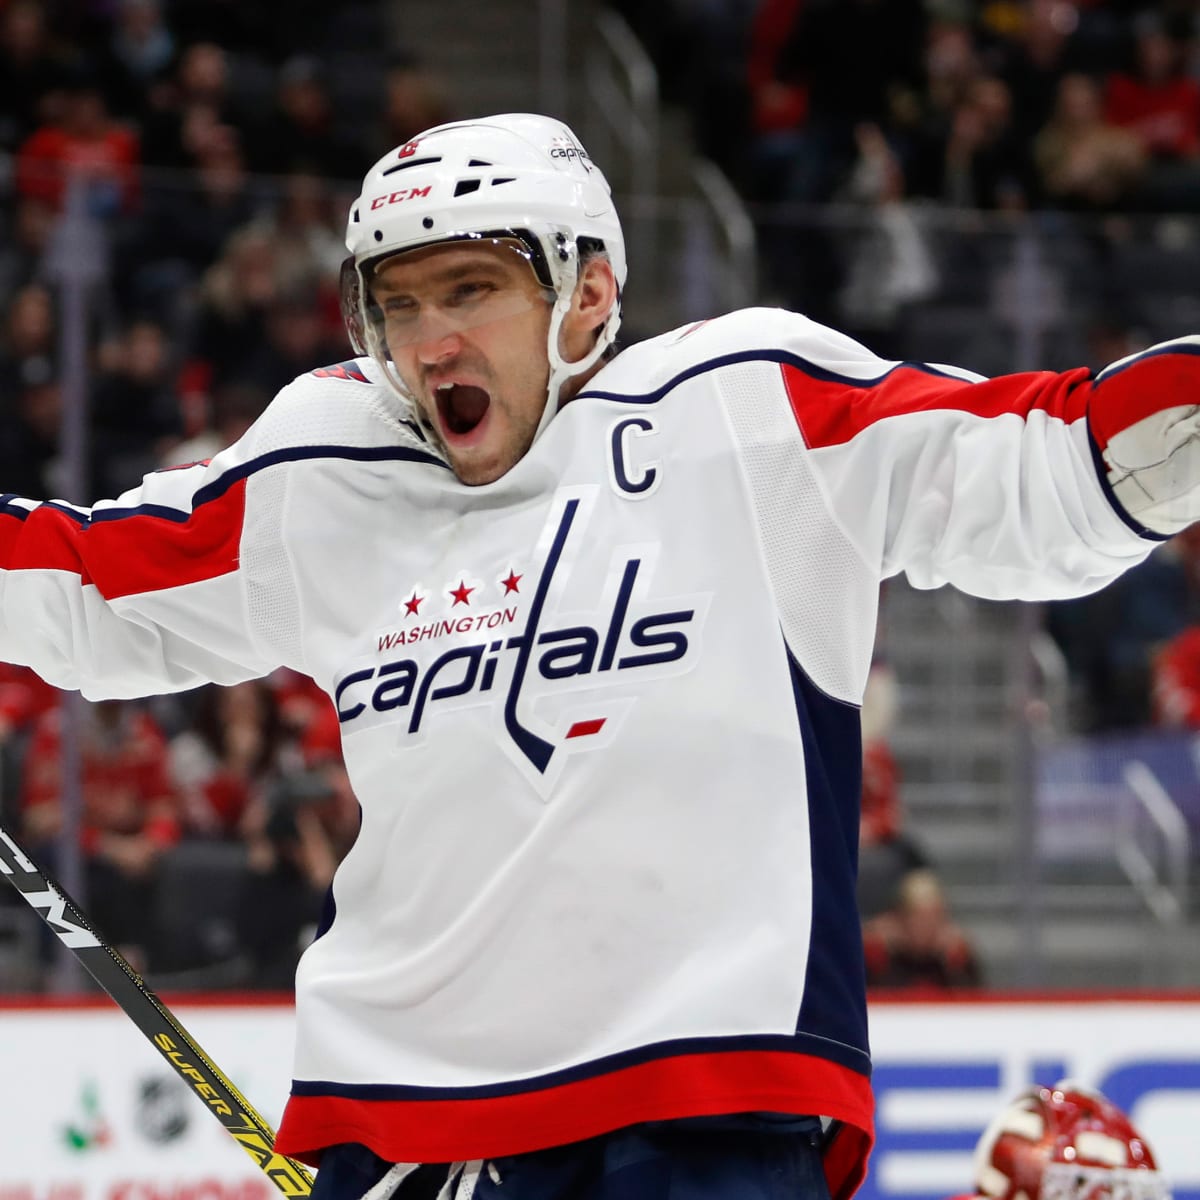 Alex Ovechkin's first NHL jersey sold for thousands - Sports Illustrated